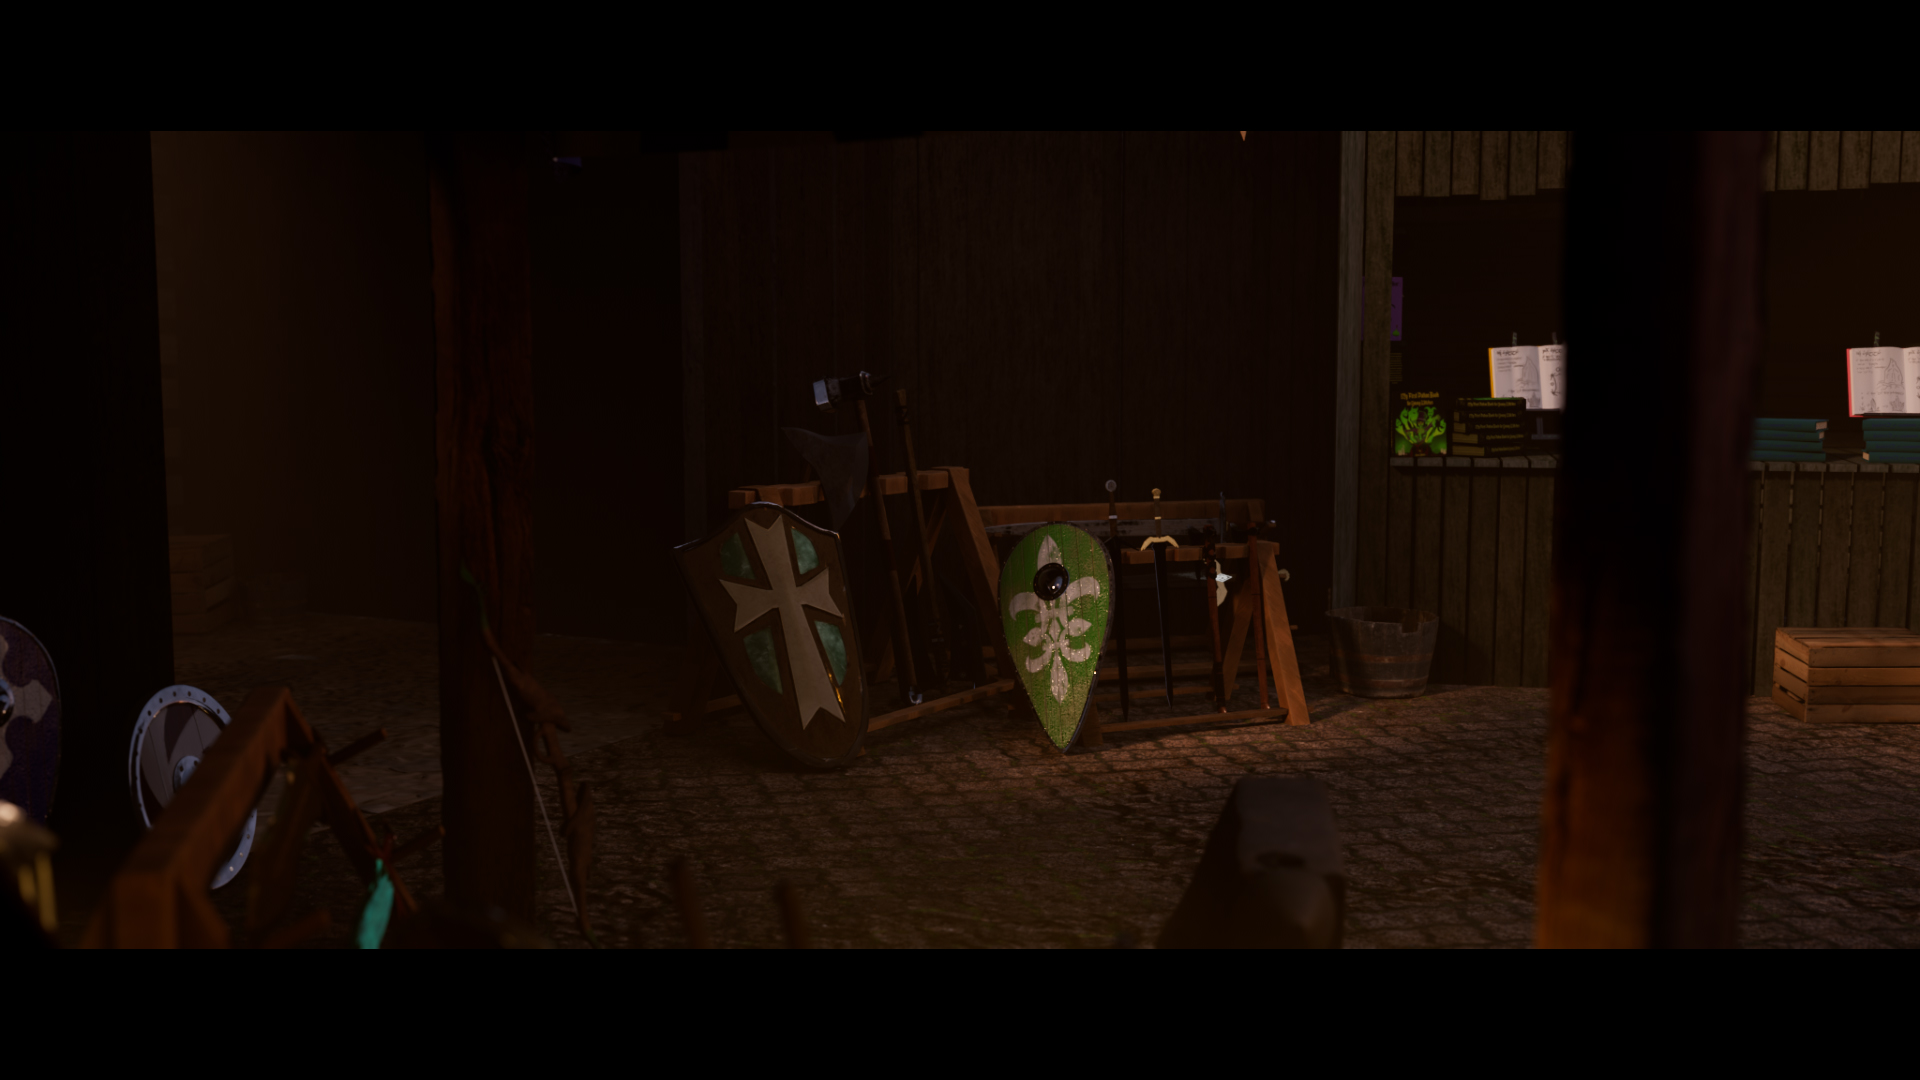 A rendered image of a medieval style market stall focusing on other weapons.